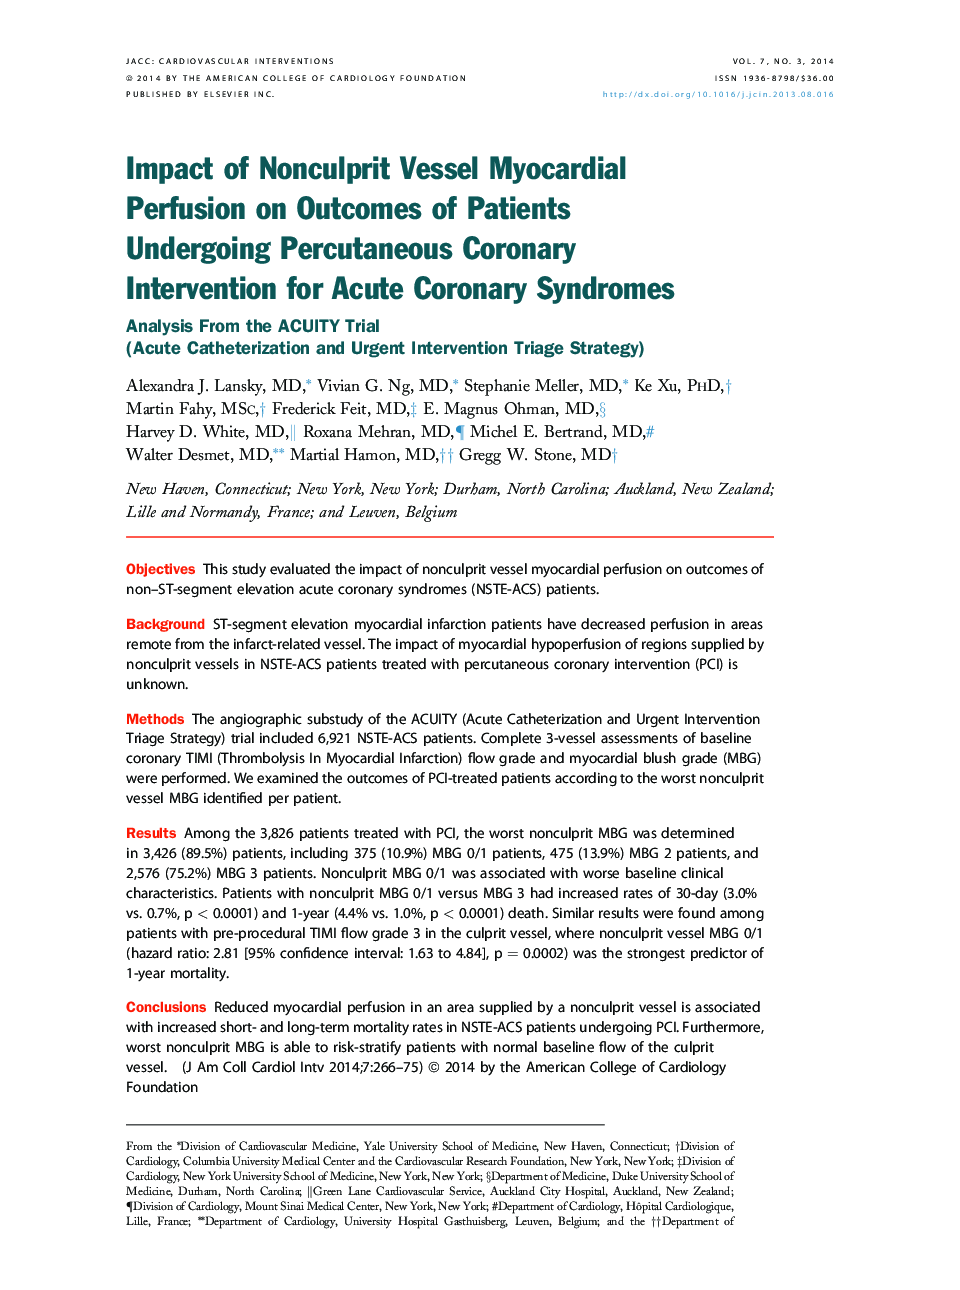 Impact of Nonculprit Vessel Myocardial Perfusion on Outcomes of Patients Undergoing Percutaneous Coronary Intervention for Acute Coronary Syndromes : Analysis From the ACUITY Trial (Acute Catheterization and Urgent Intervention Triage Strategy)